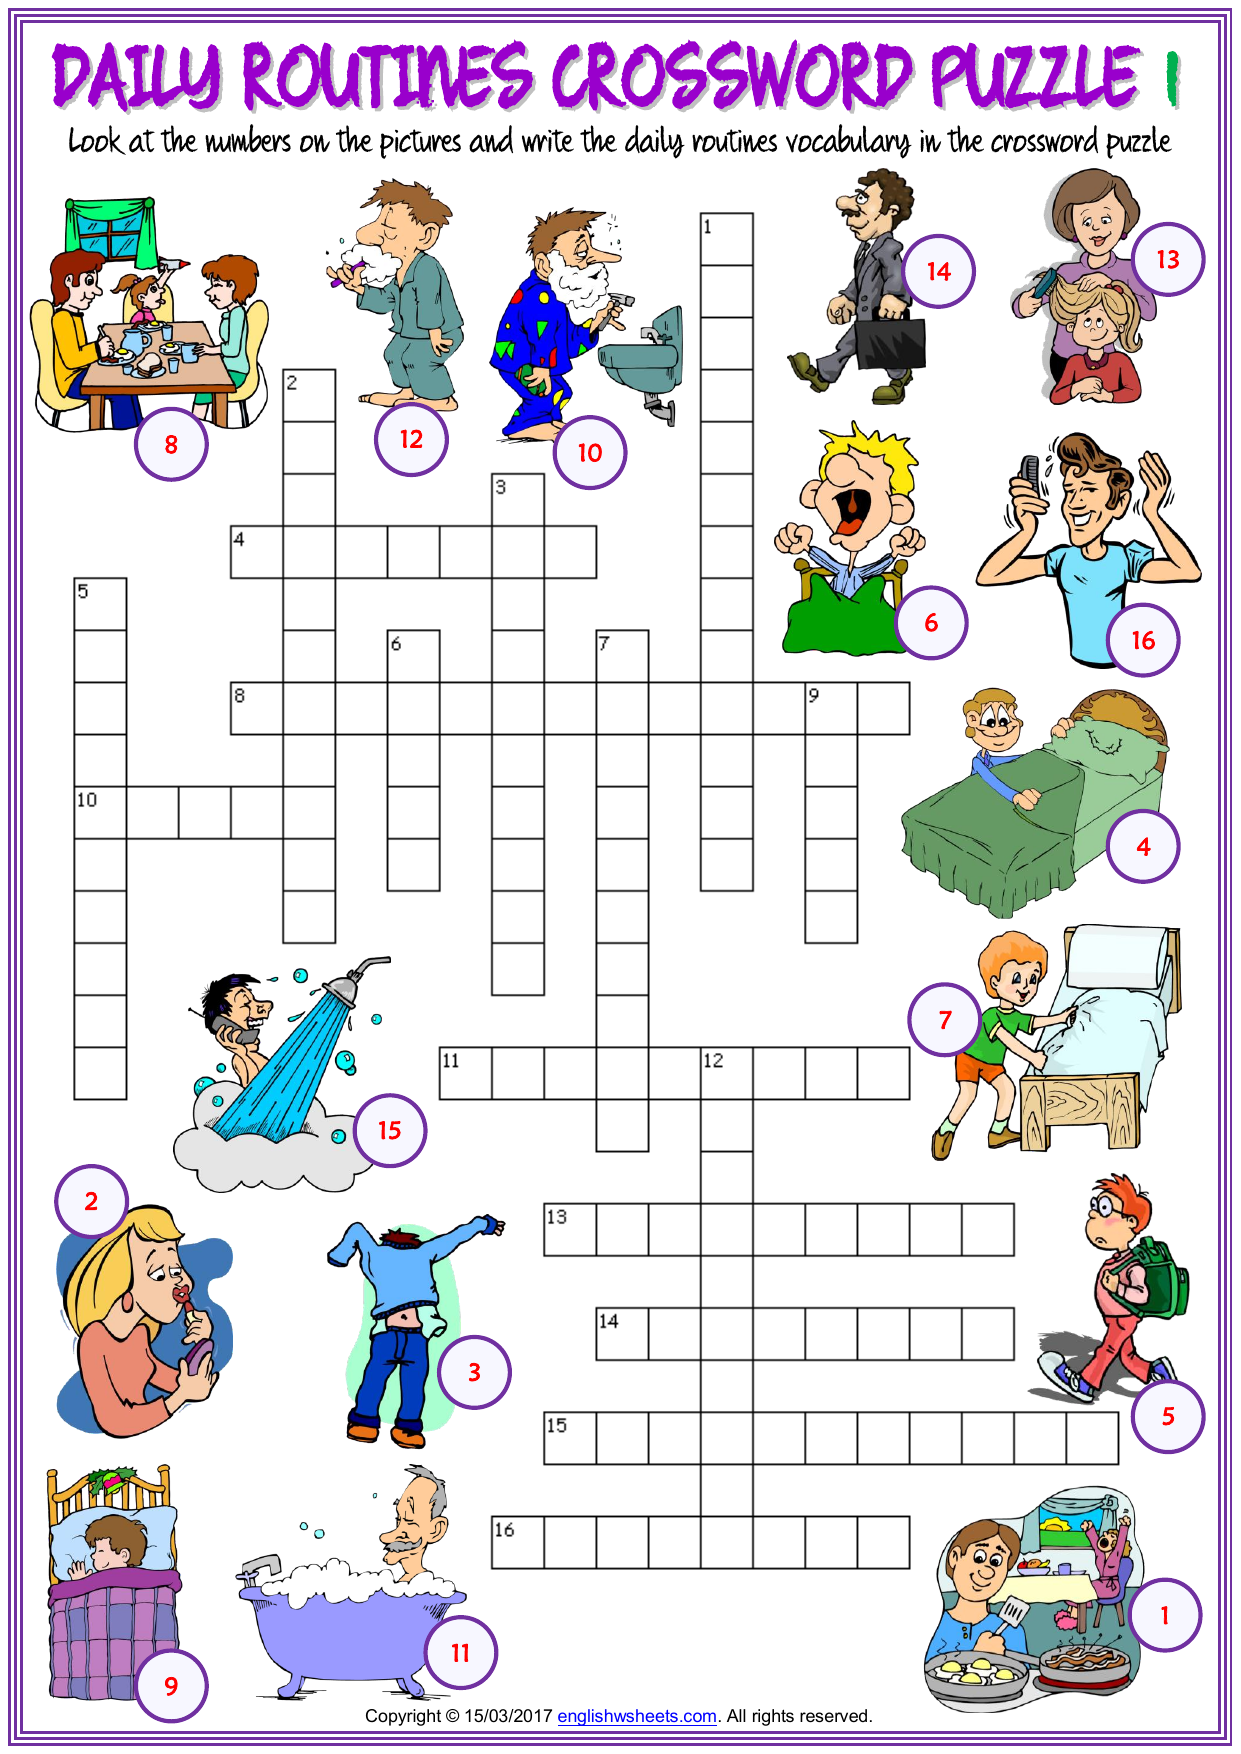 daily-routines-vocabulary-esl-crossword-puzzle-worksheets-for-kids